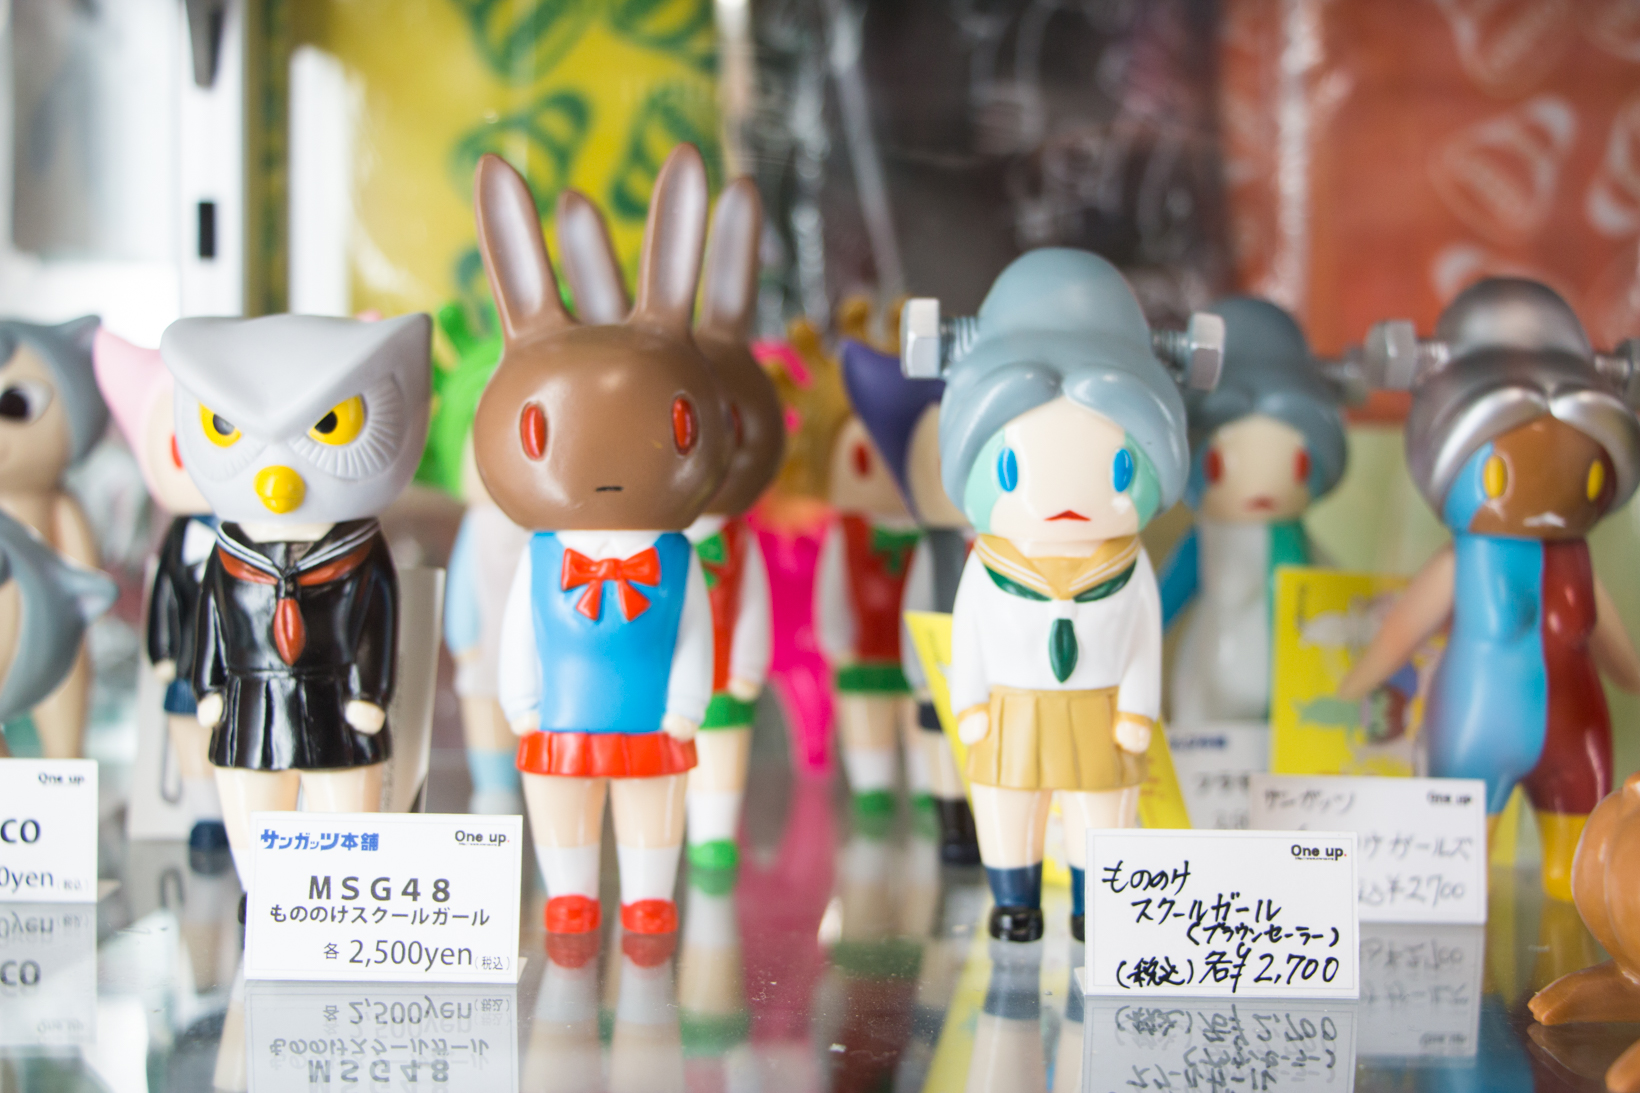 One up. Akihabara: A Grand Exhibition of Sofubi Culture!